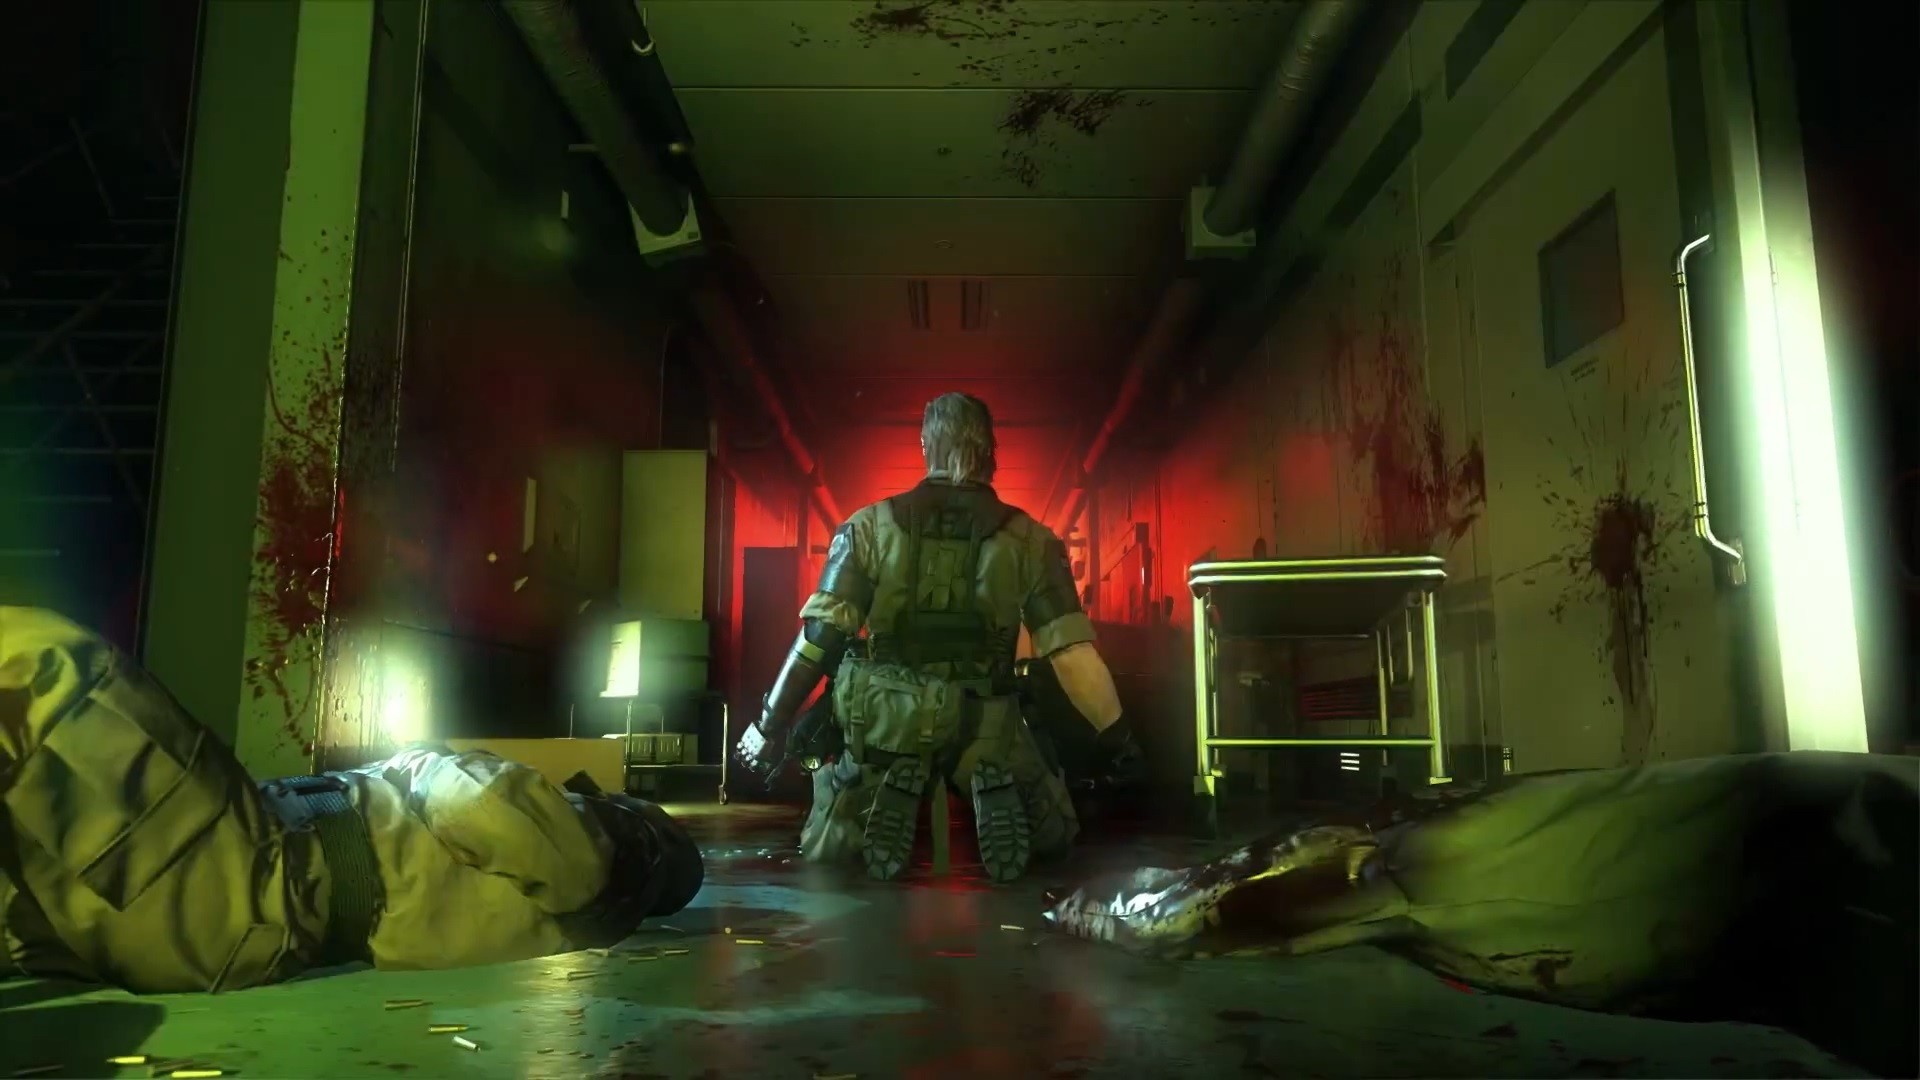 1920x1080 Metal Gear Solid V: The Phantom Pain's E3 trailer is as barmy as you'd hope